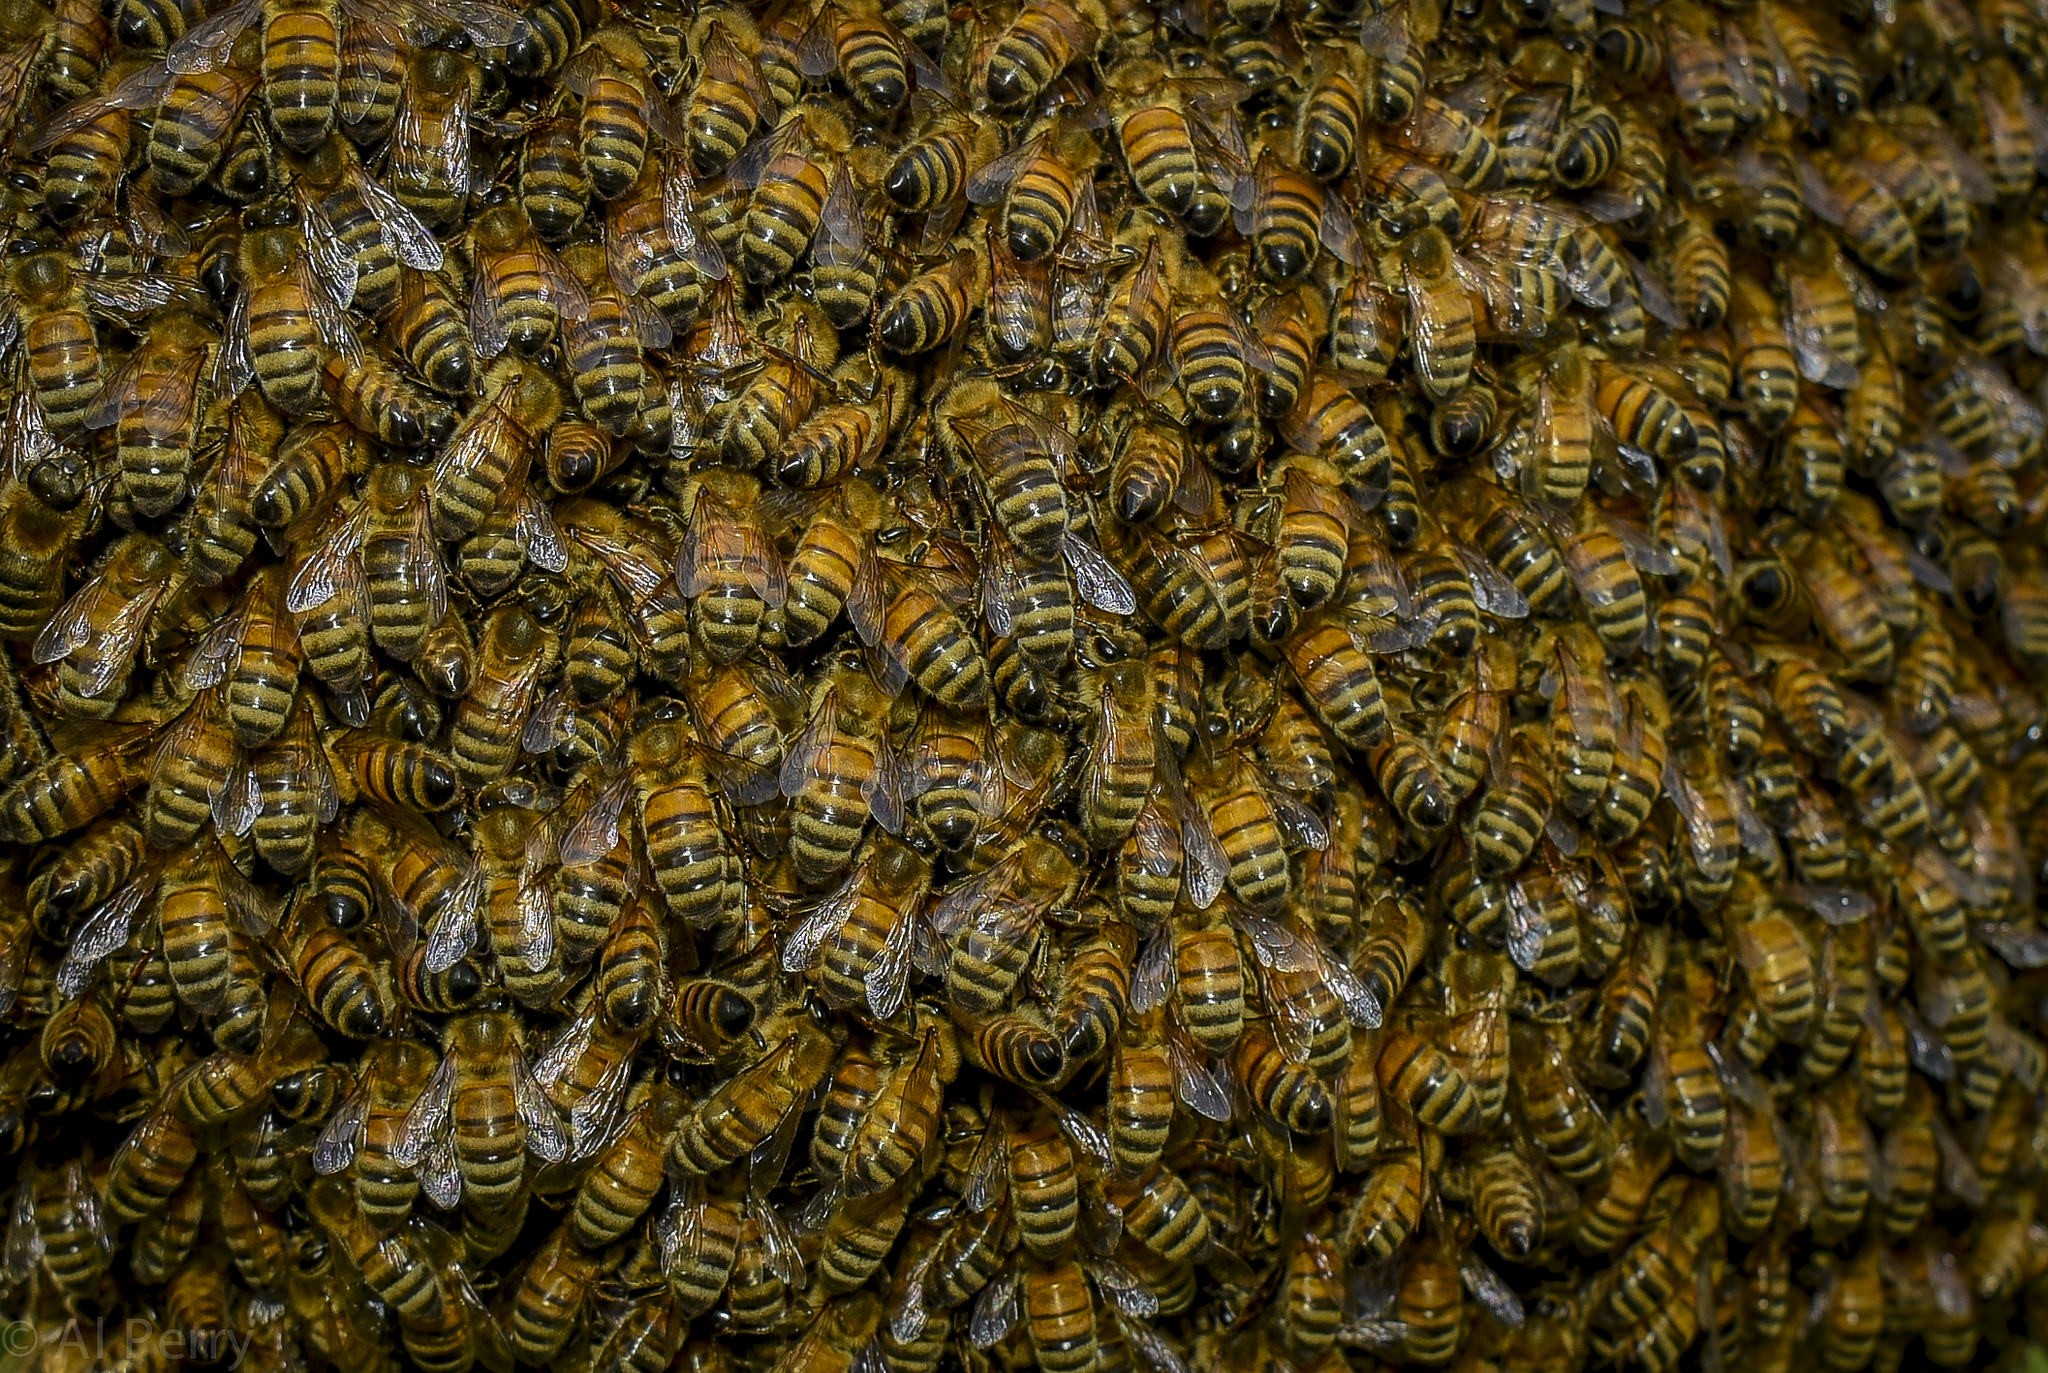 General 2048x1373 bees animals insect